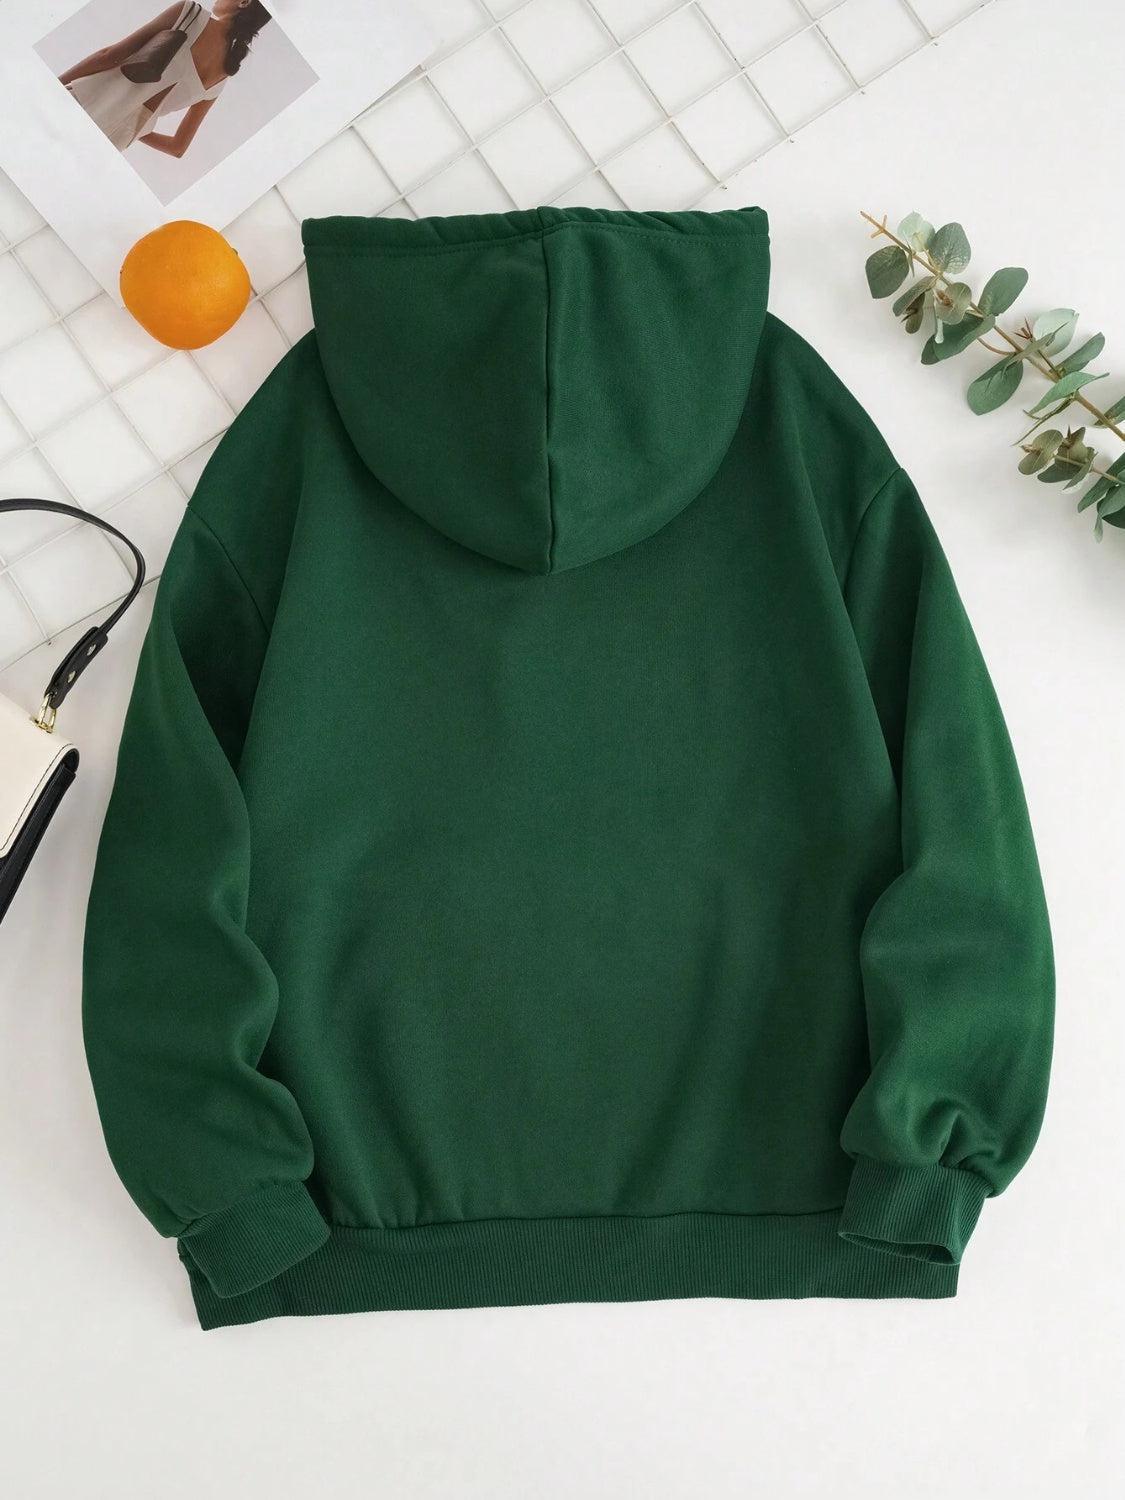 a green hoodie sitting on top of a white table